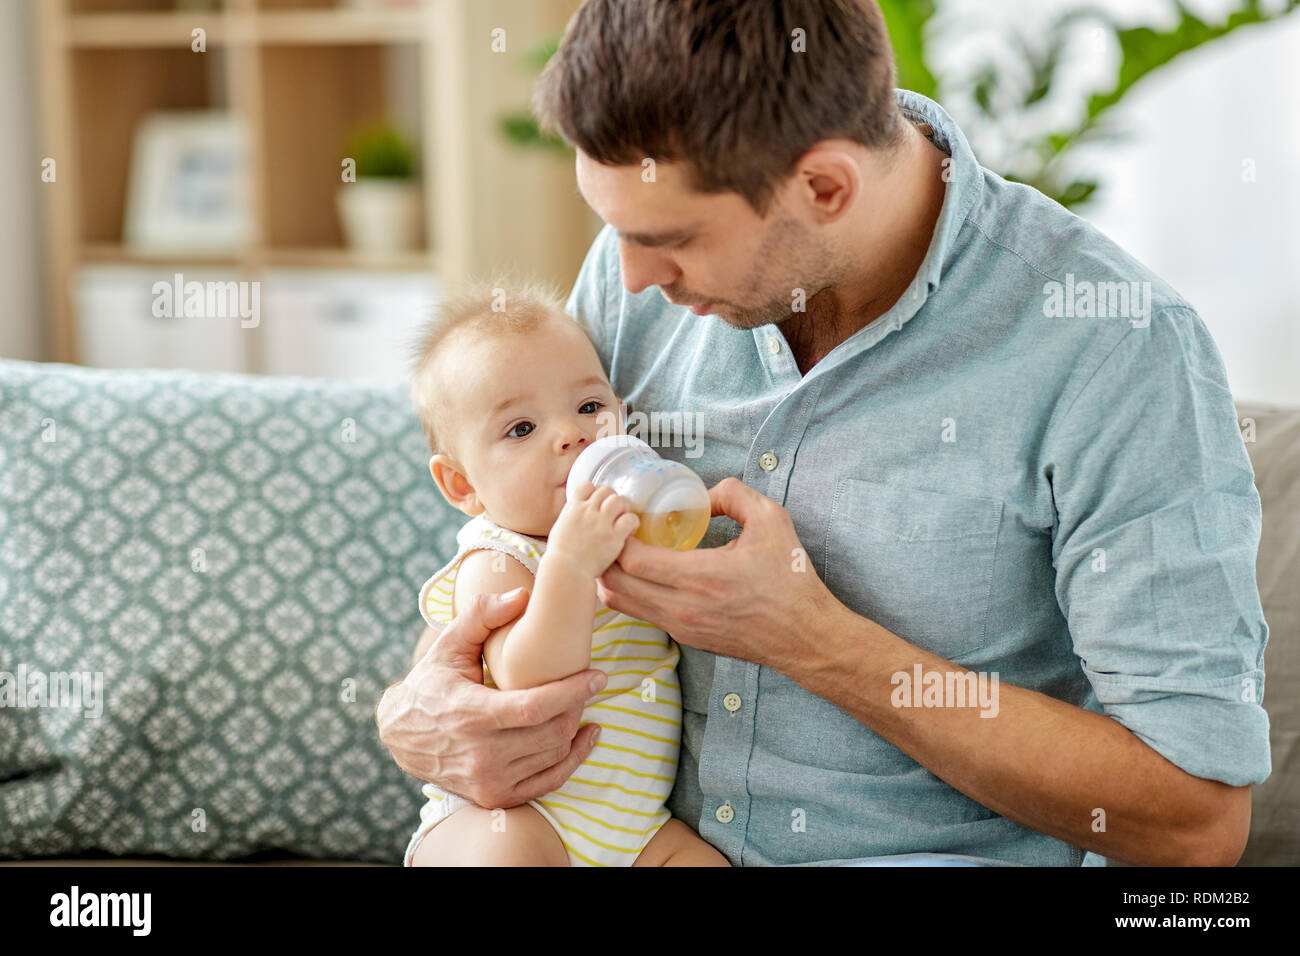 father and baby drinking from bottle at home Stock Photo